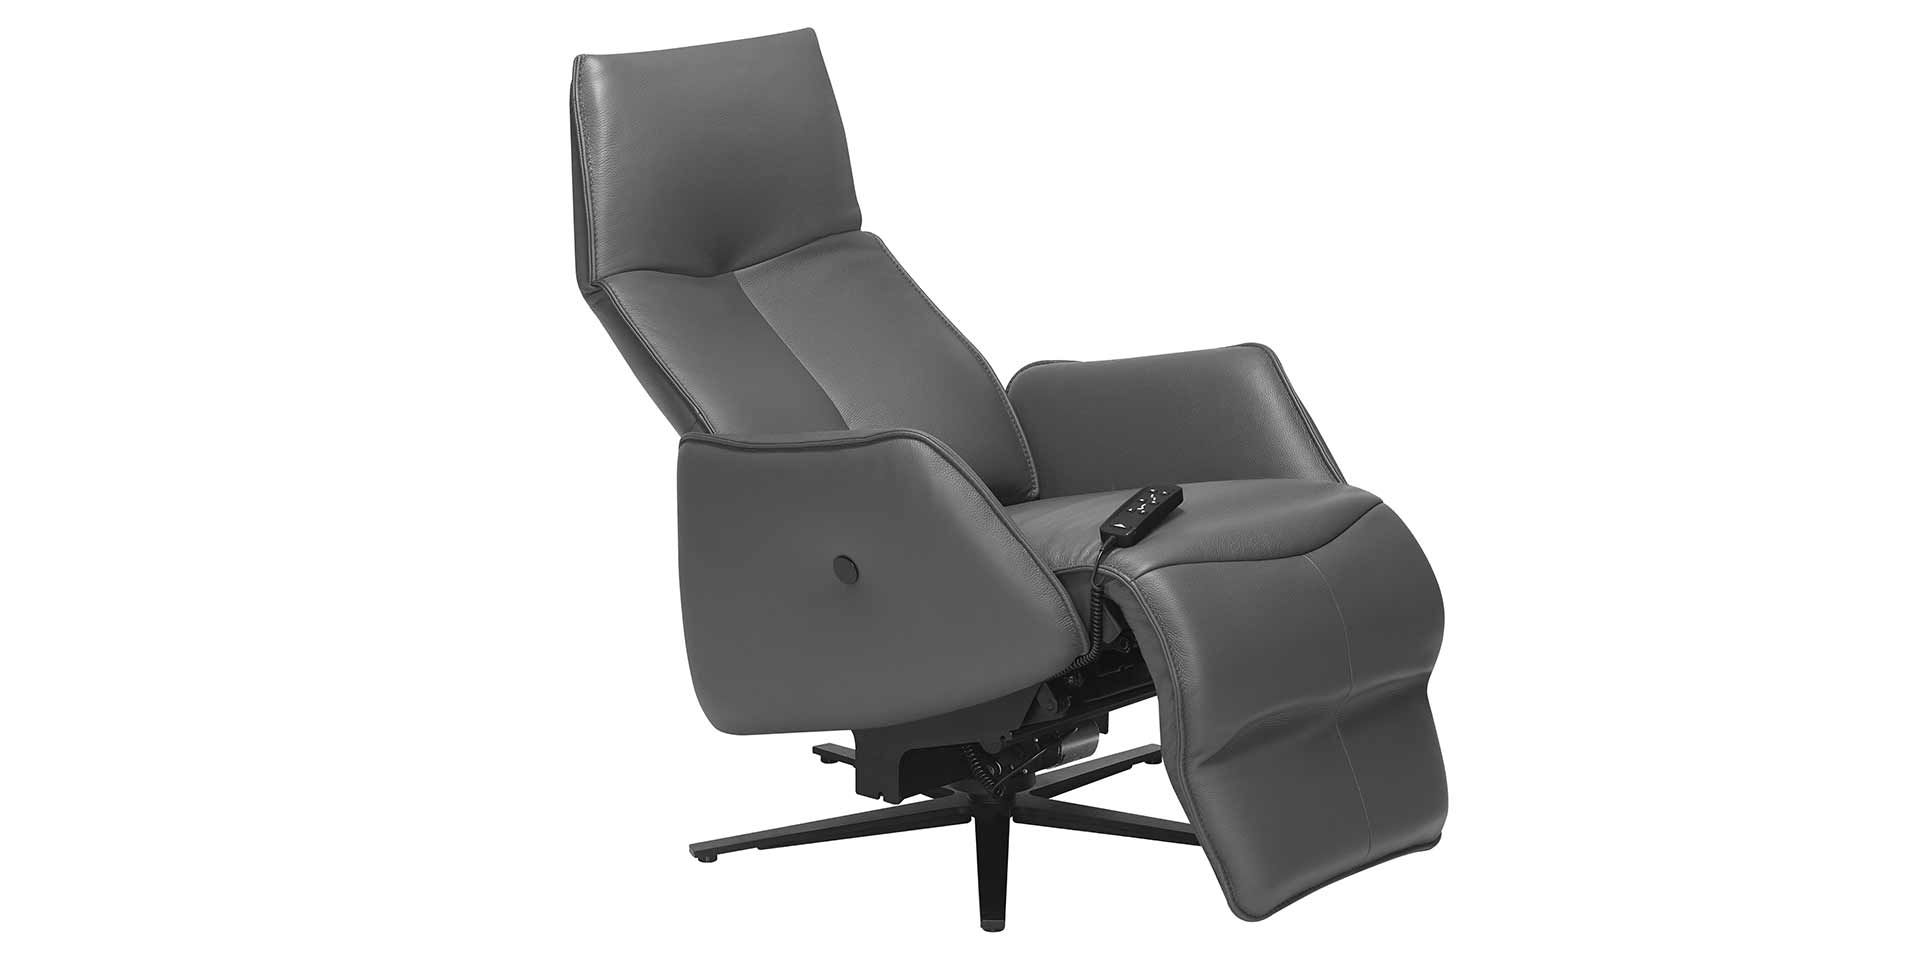 Slider Fauteuil relaxation 7917 (image 7)